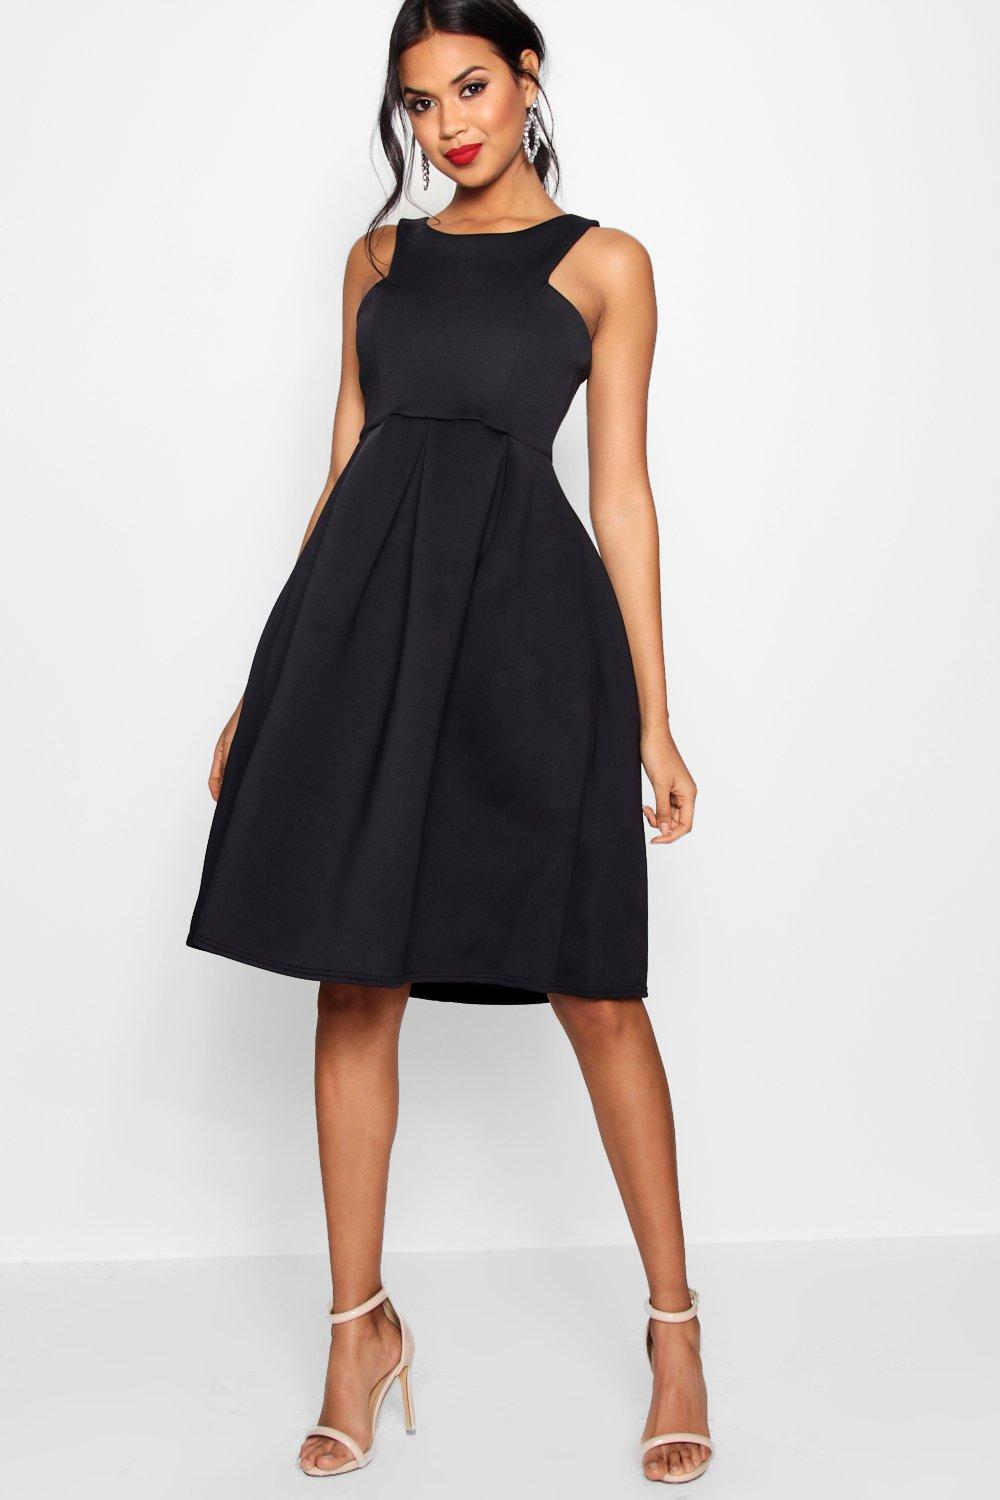 nelly one shoulder dress